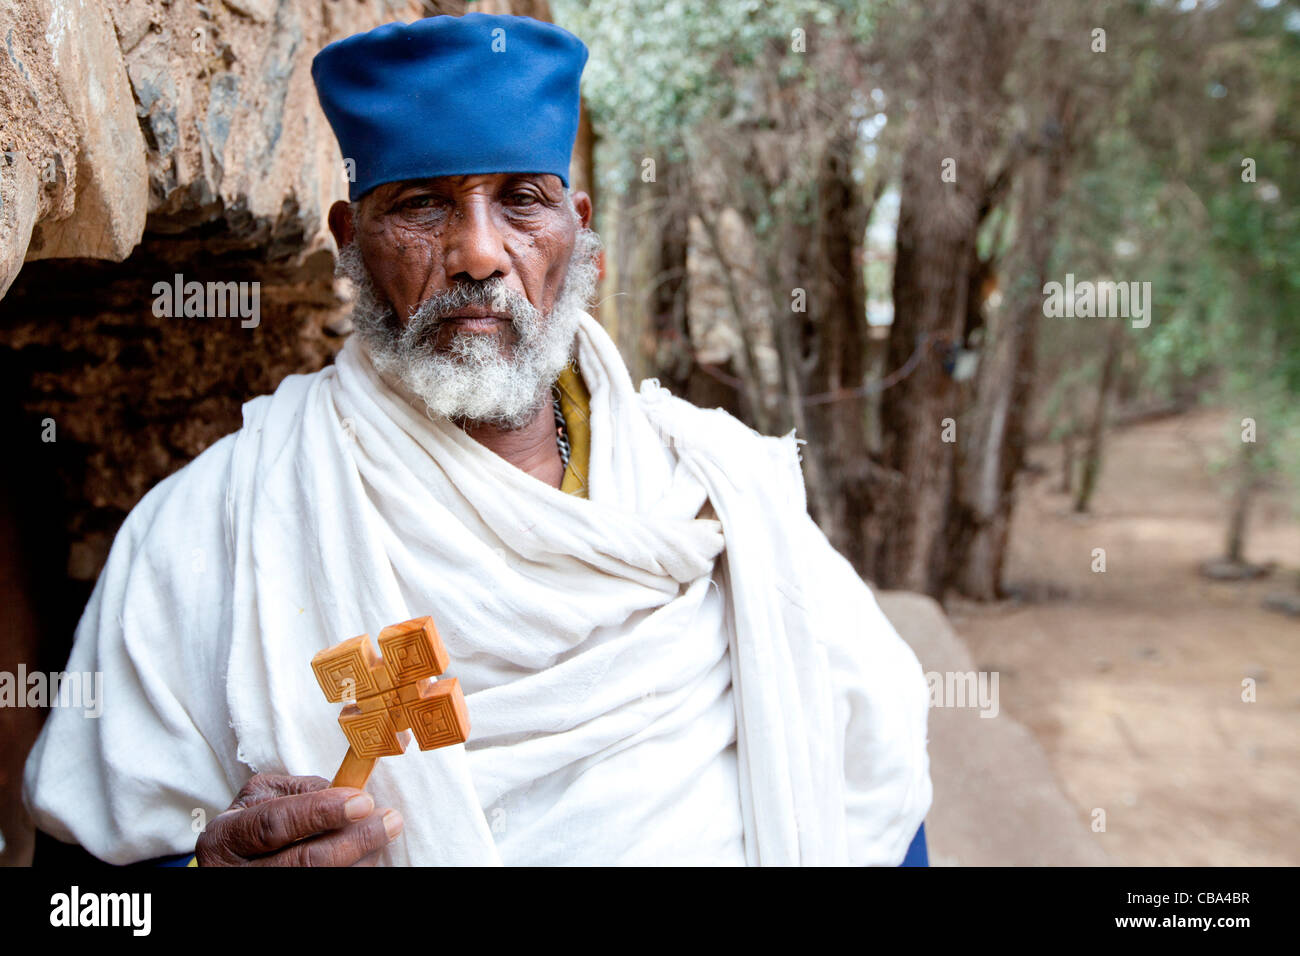 Orthodox Christian priest at the gate-house of Debre Berhan Selassie Church in Gonder, Northern Ethiopia, Africa. Stock Photo